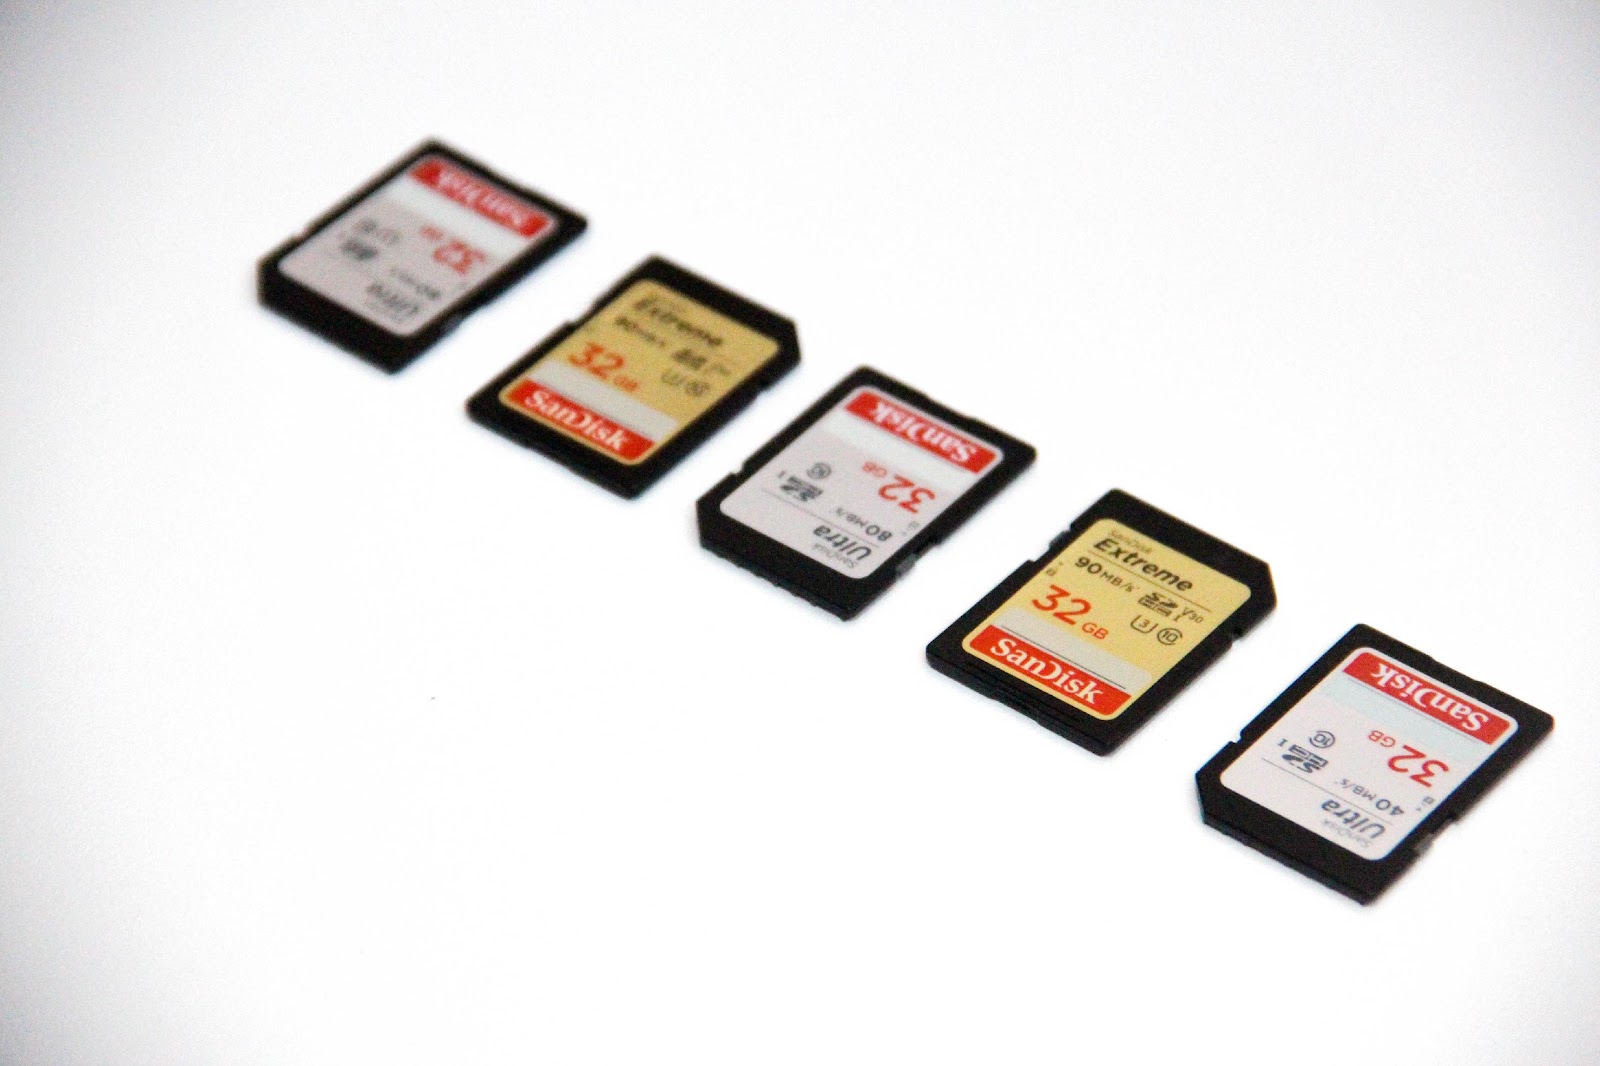 several sd cards